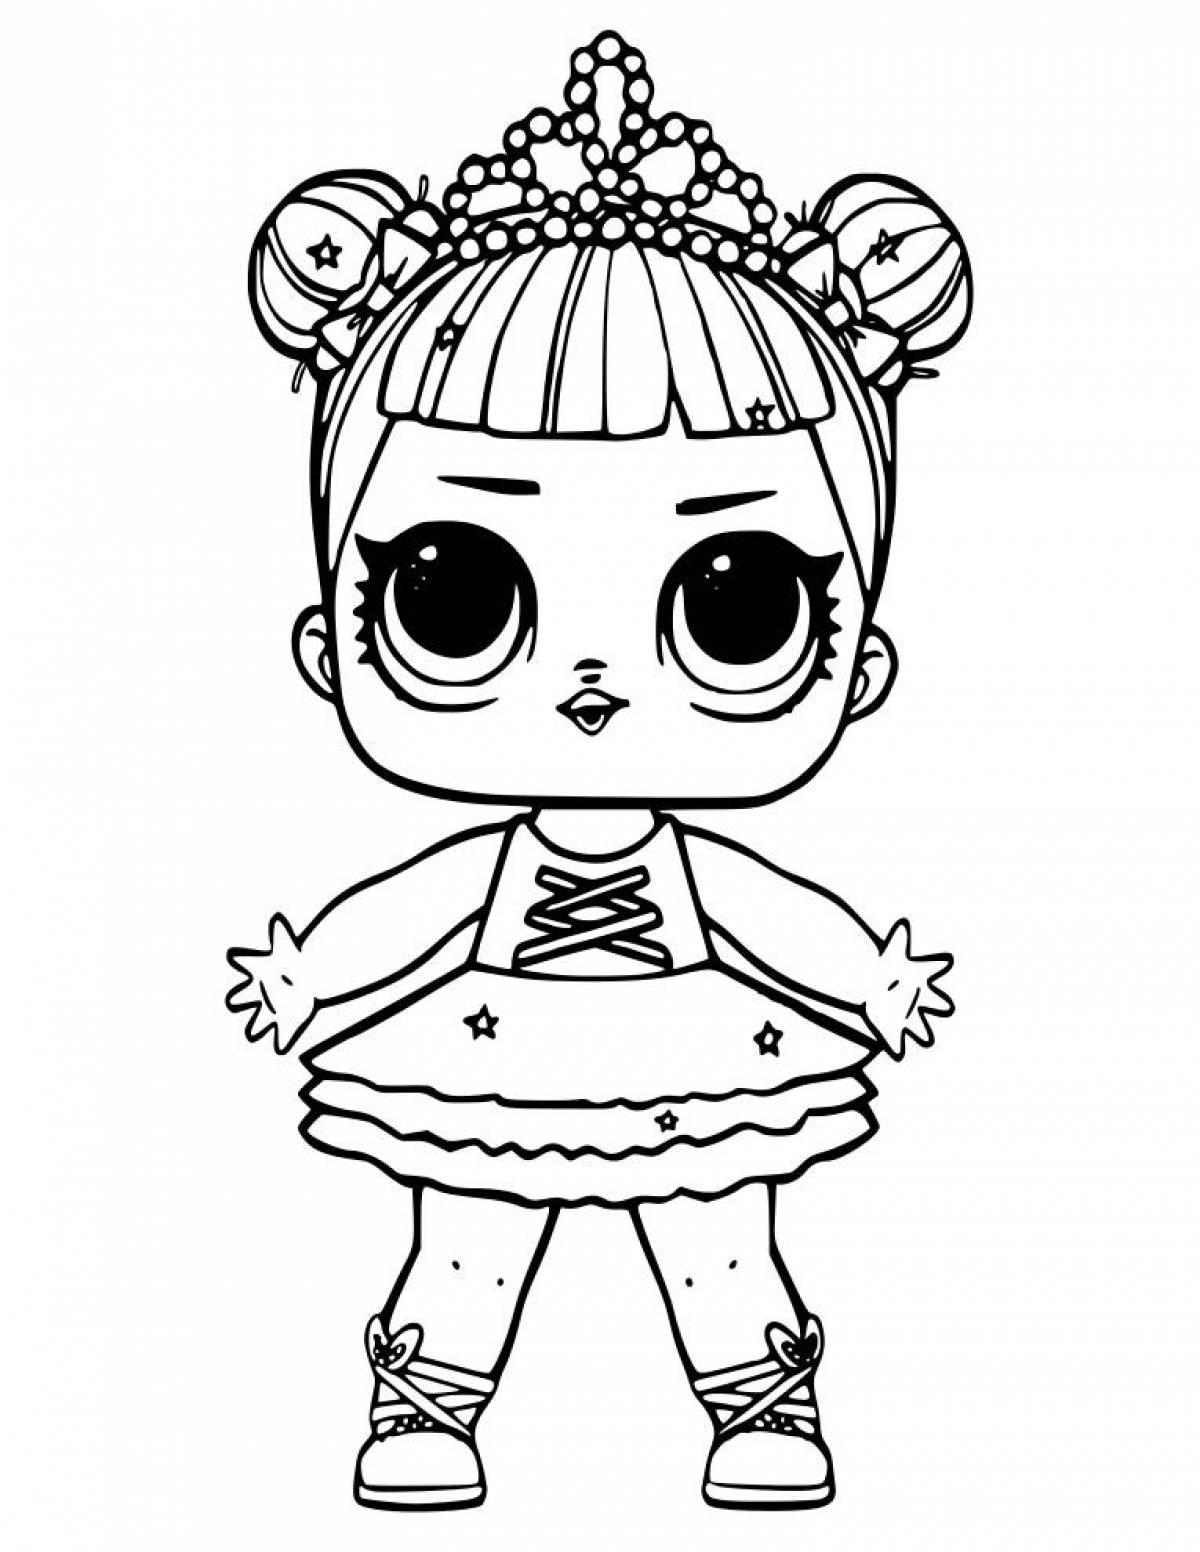 Blissful lola doll coloring